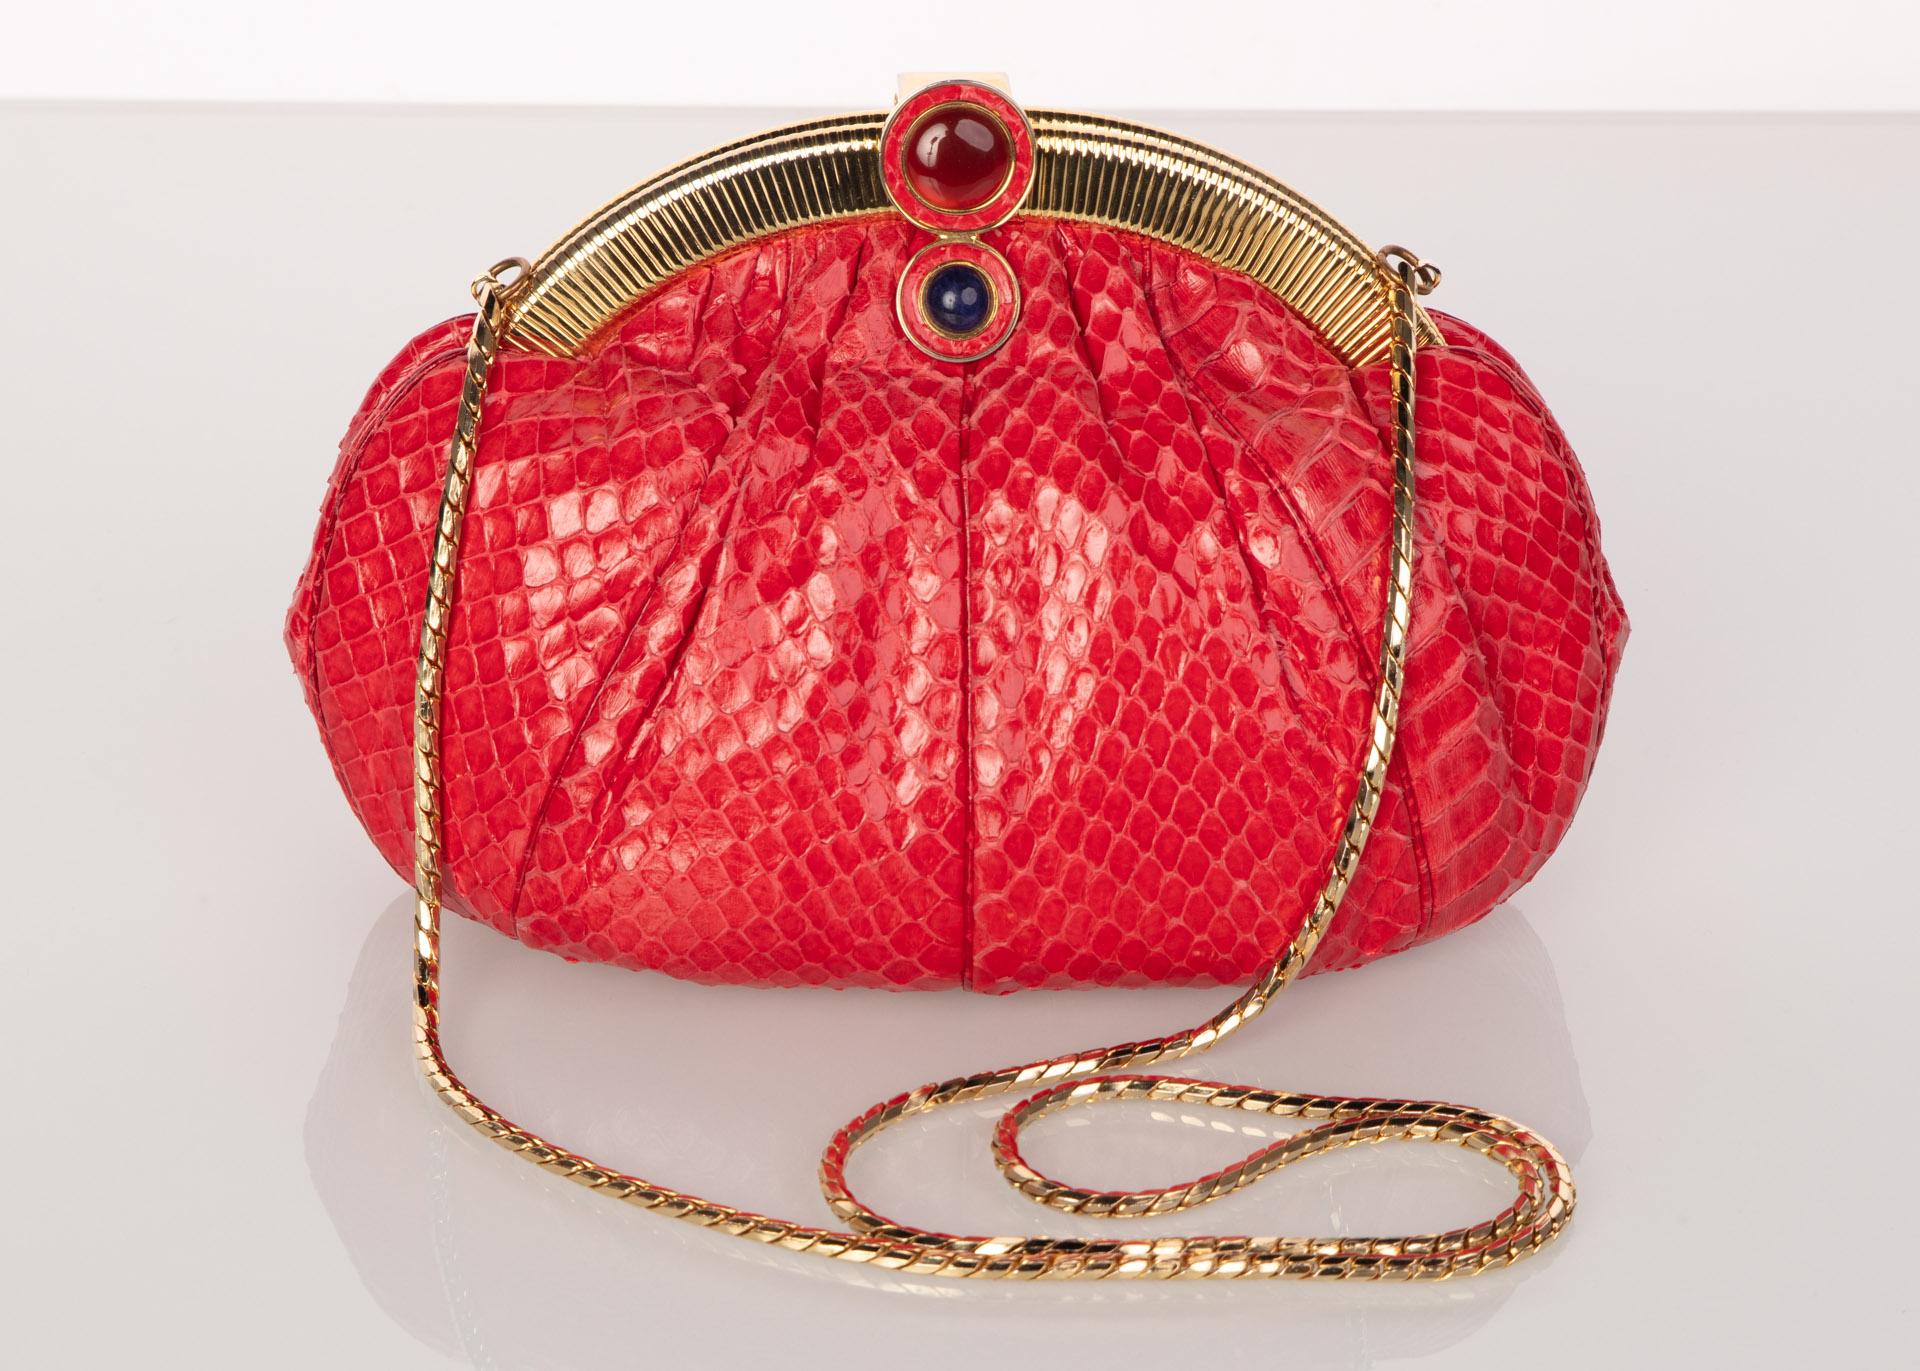 Born in the tumultuous time of the World War decades, Hungarian born Judith Leiber achieved astonishing accomplishments for her work in handbag and leather good design. Being the first woman inducted into the Hungarian Handbag Guild, Leiber’s craft